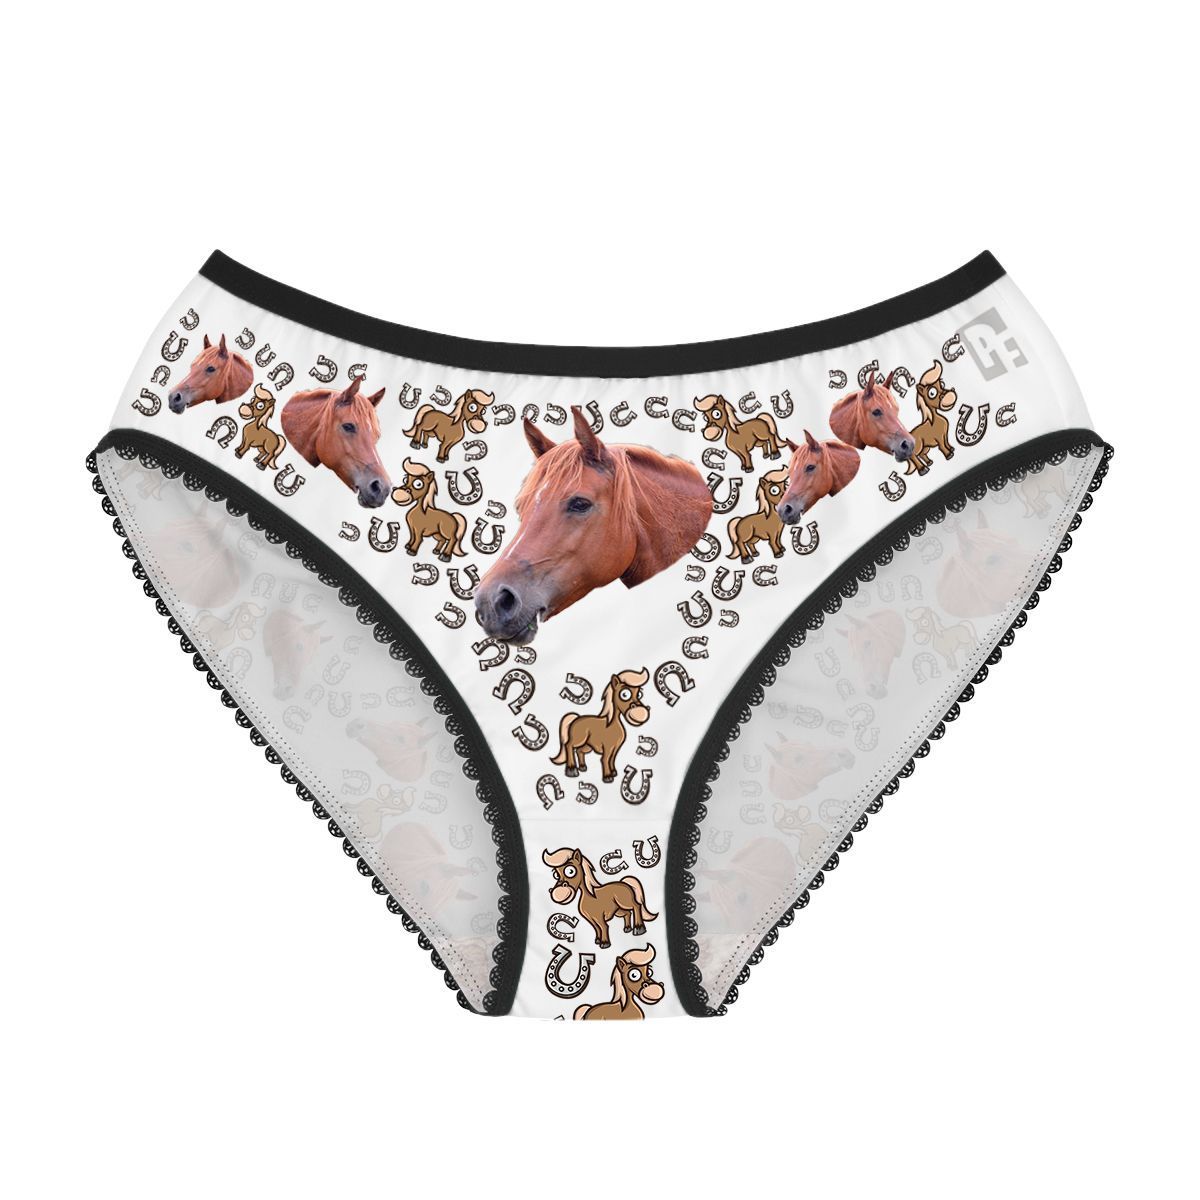 White Horse women's underwear briefs personalized with photo printed on them